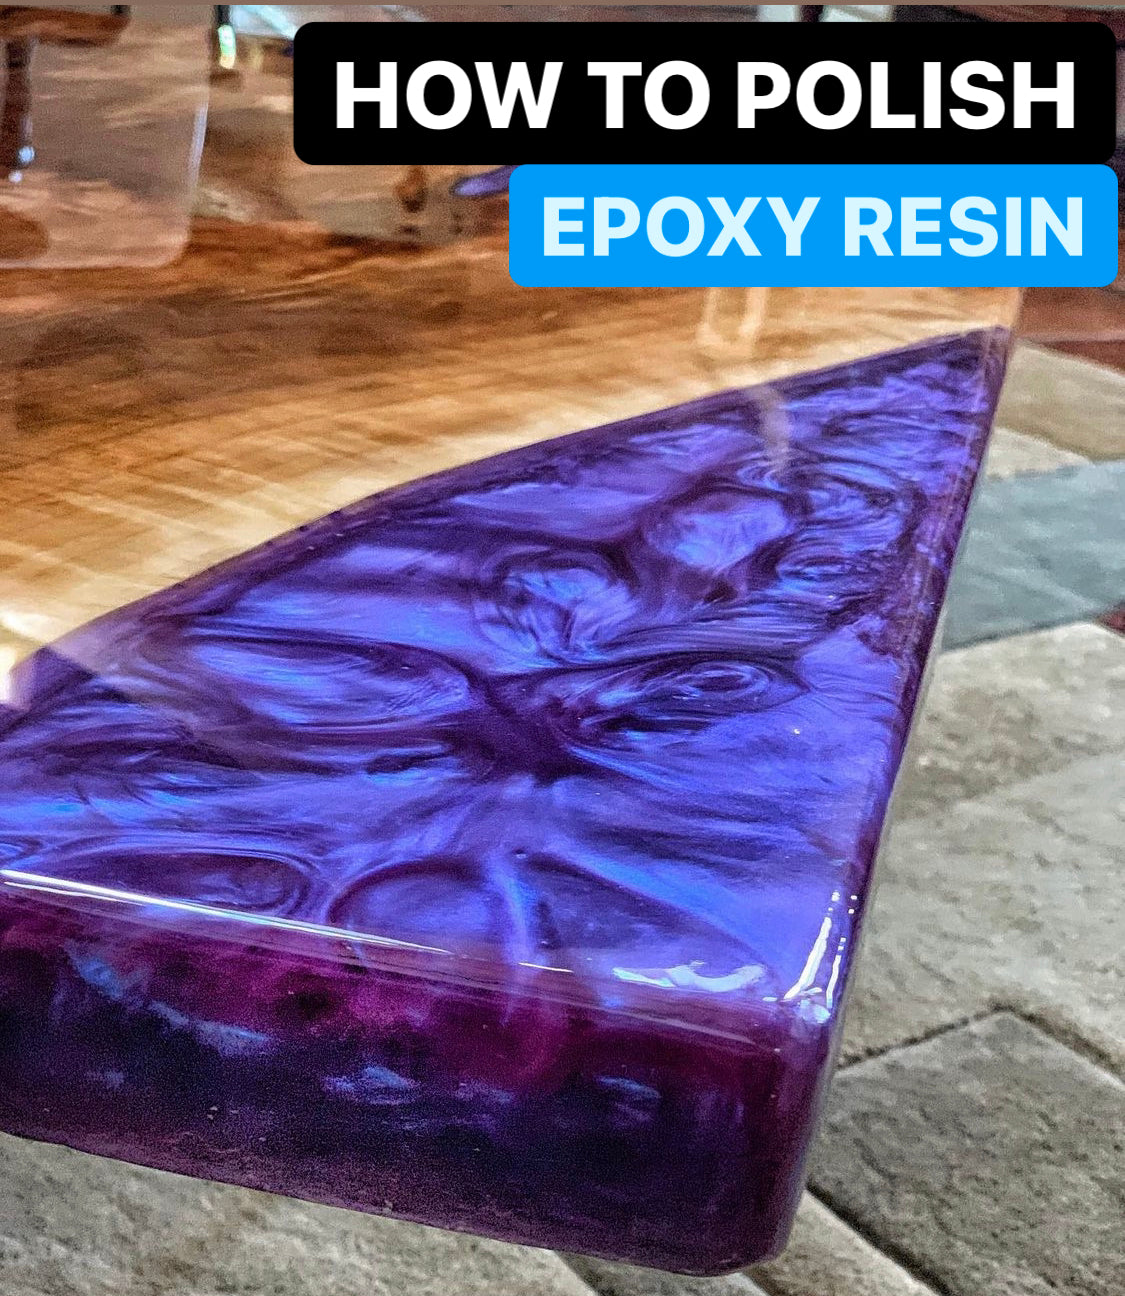 How to Polish Epoxy Resin for a Clear Finish